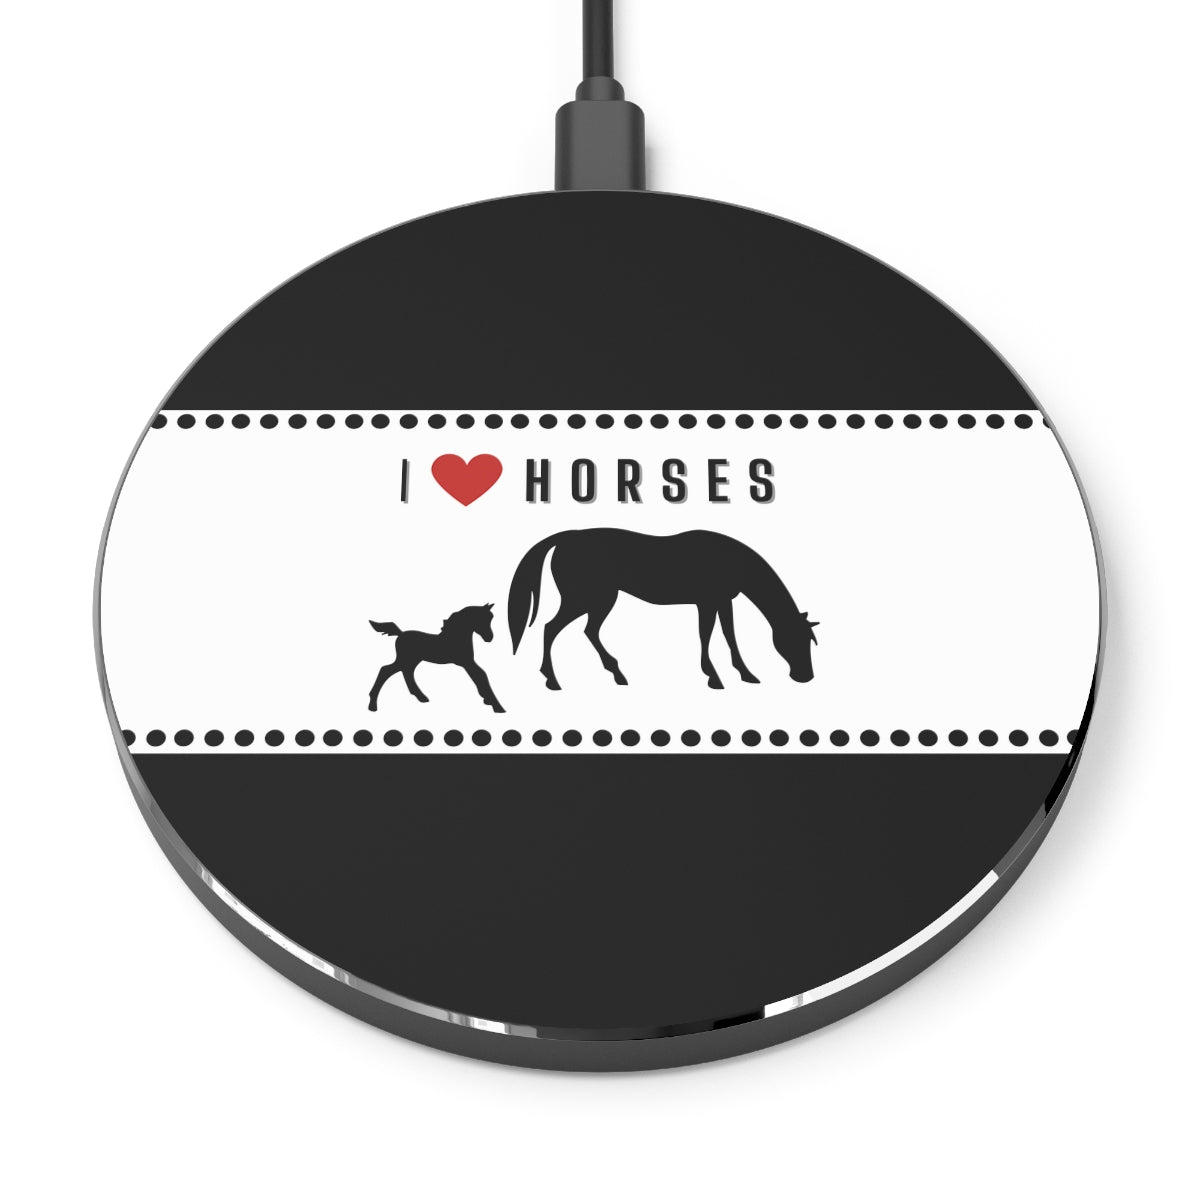 "I love horses" Black Wireless Charger